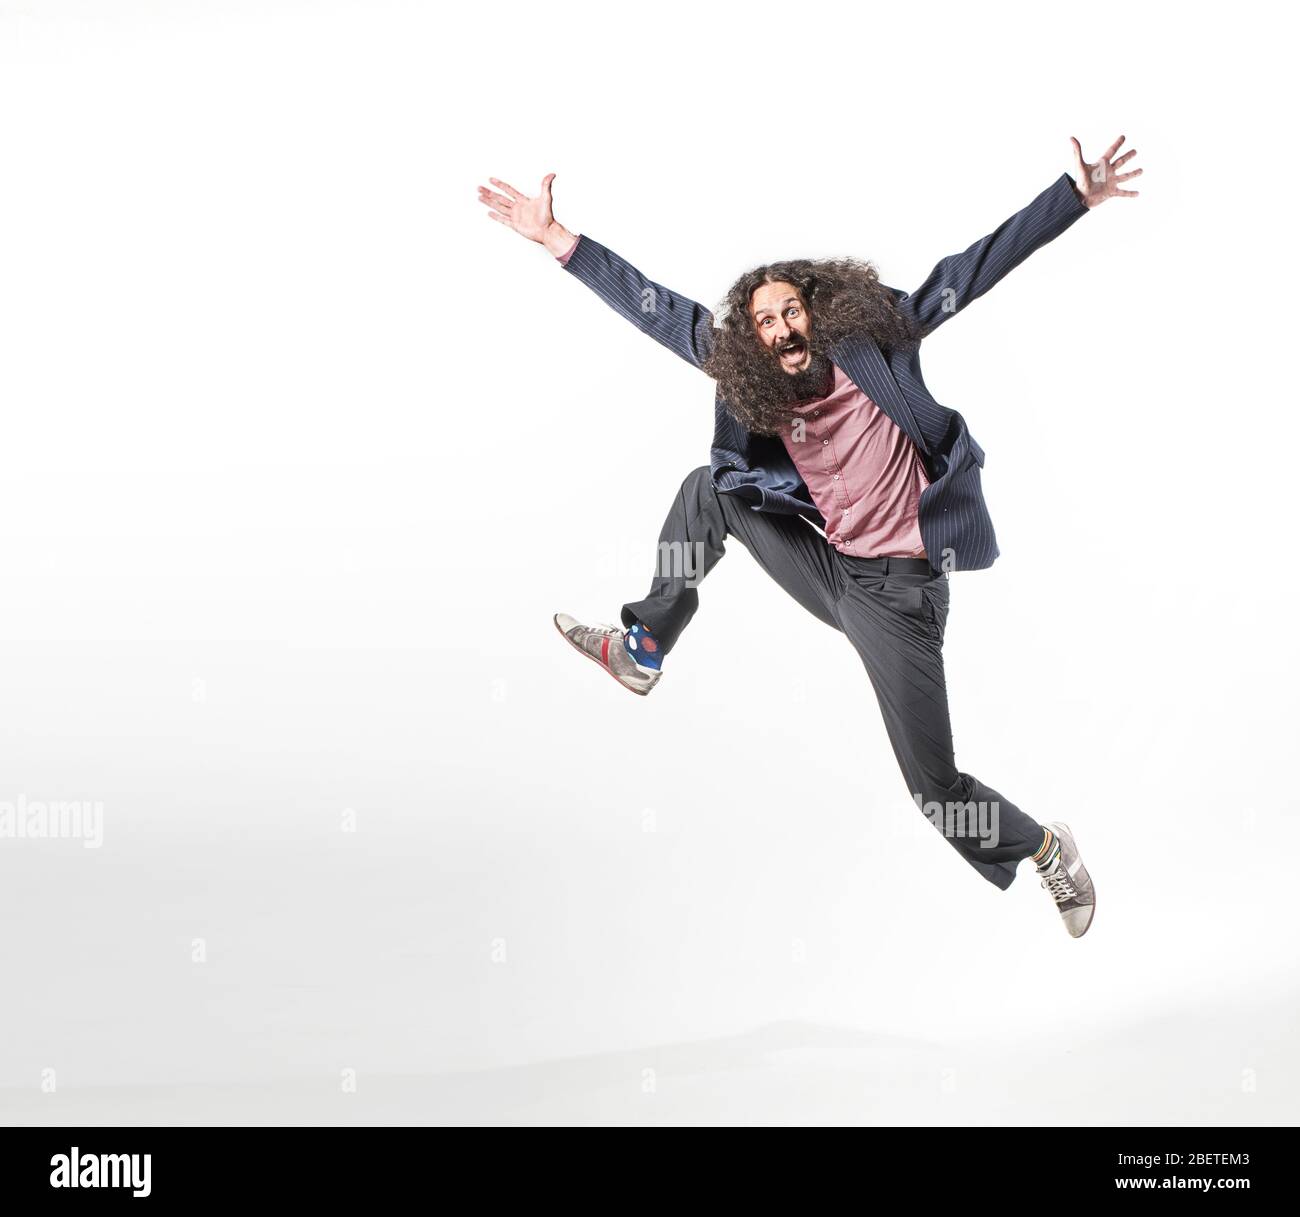 Portrait of an odd jumping guy Stock Photo